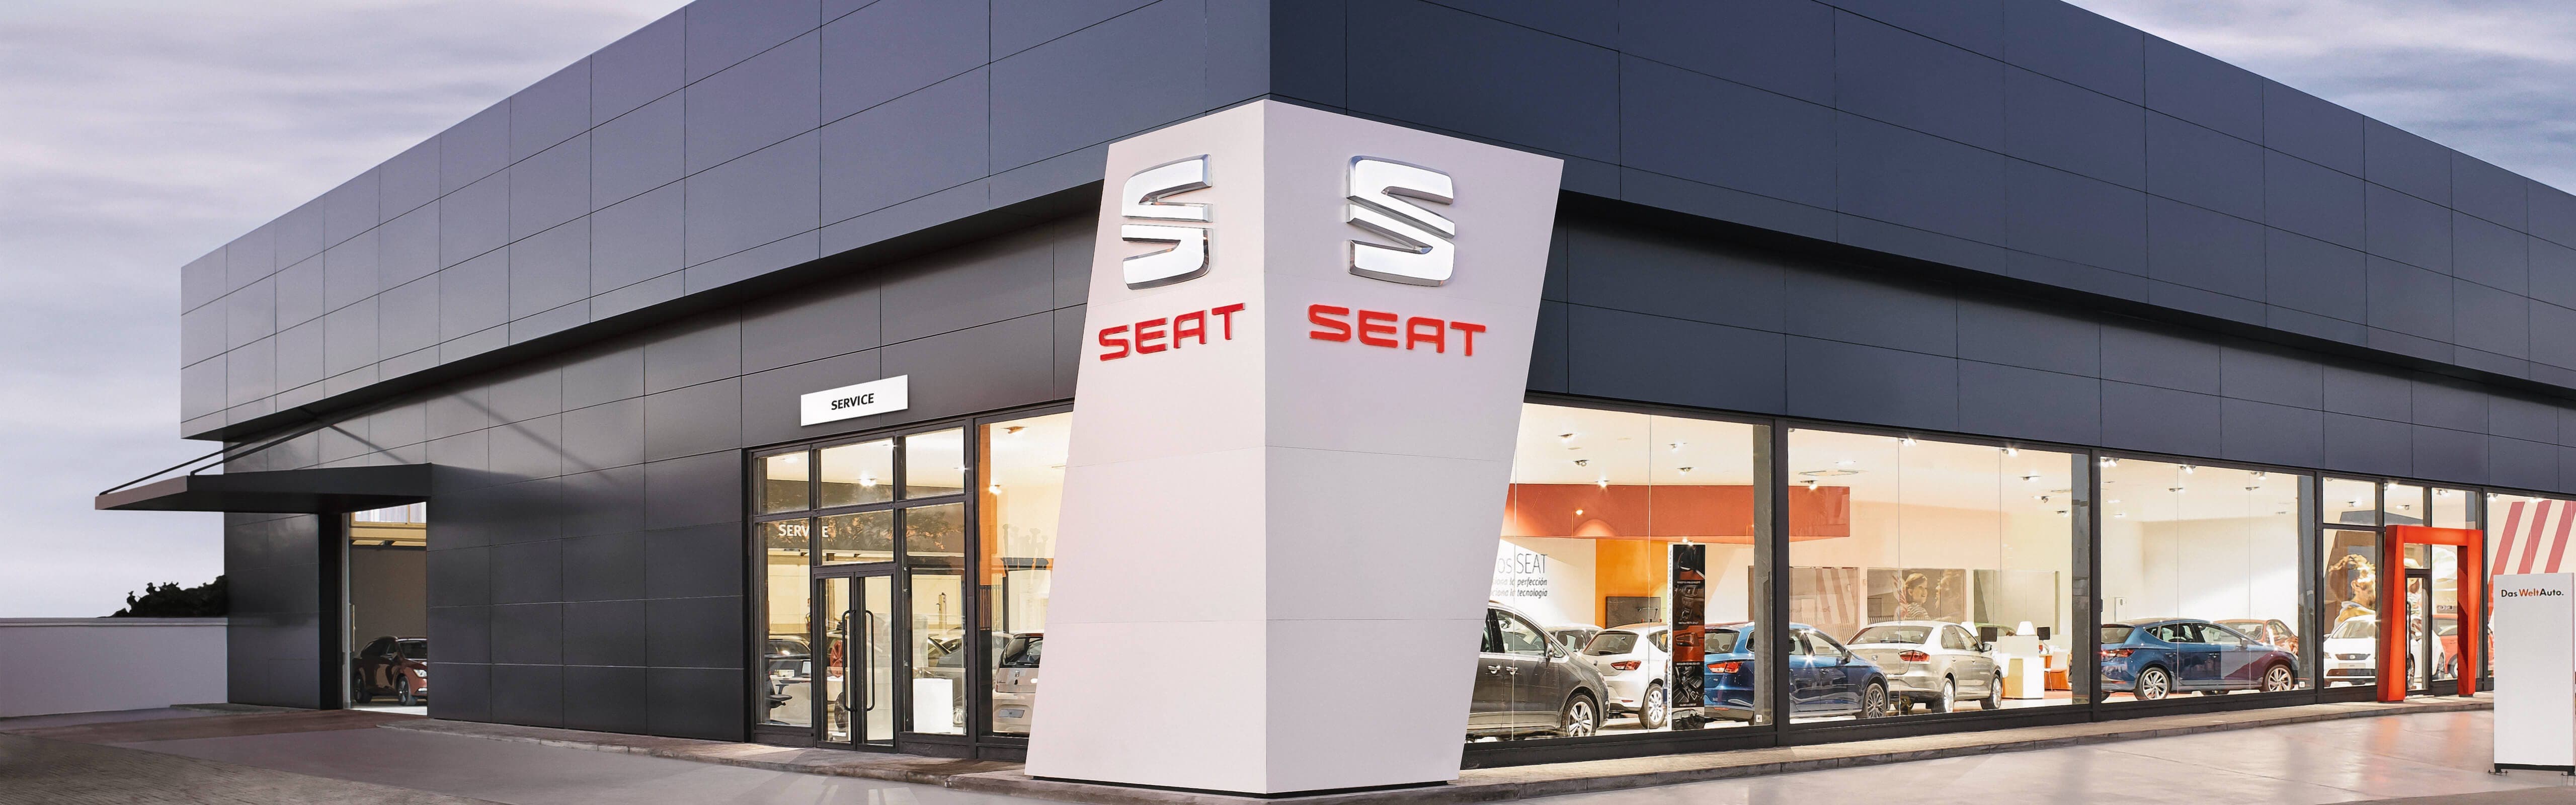 SEAT Diesel engines information – SEAT Arona desire red in a car dealership